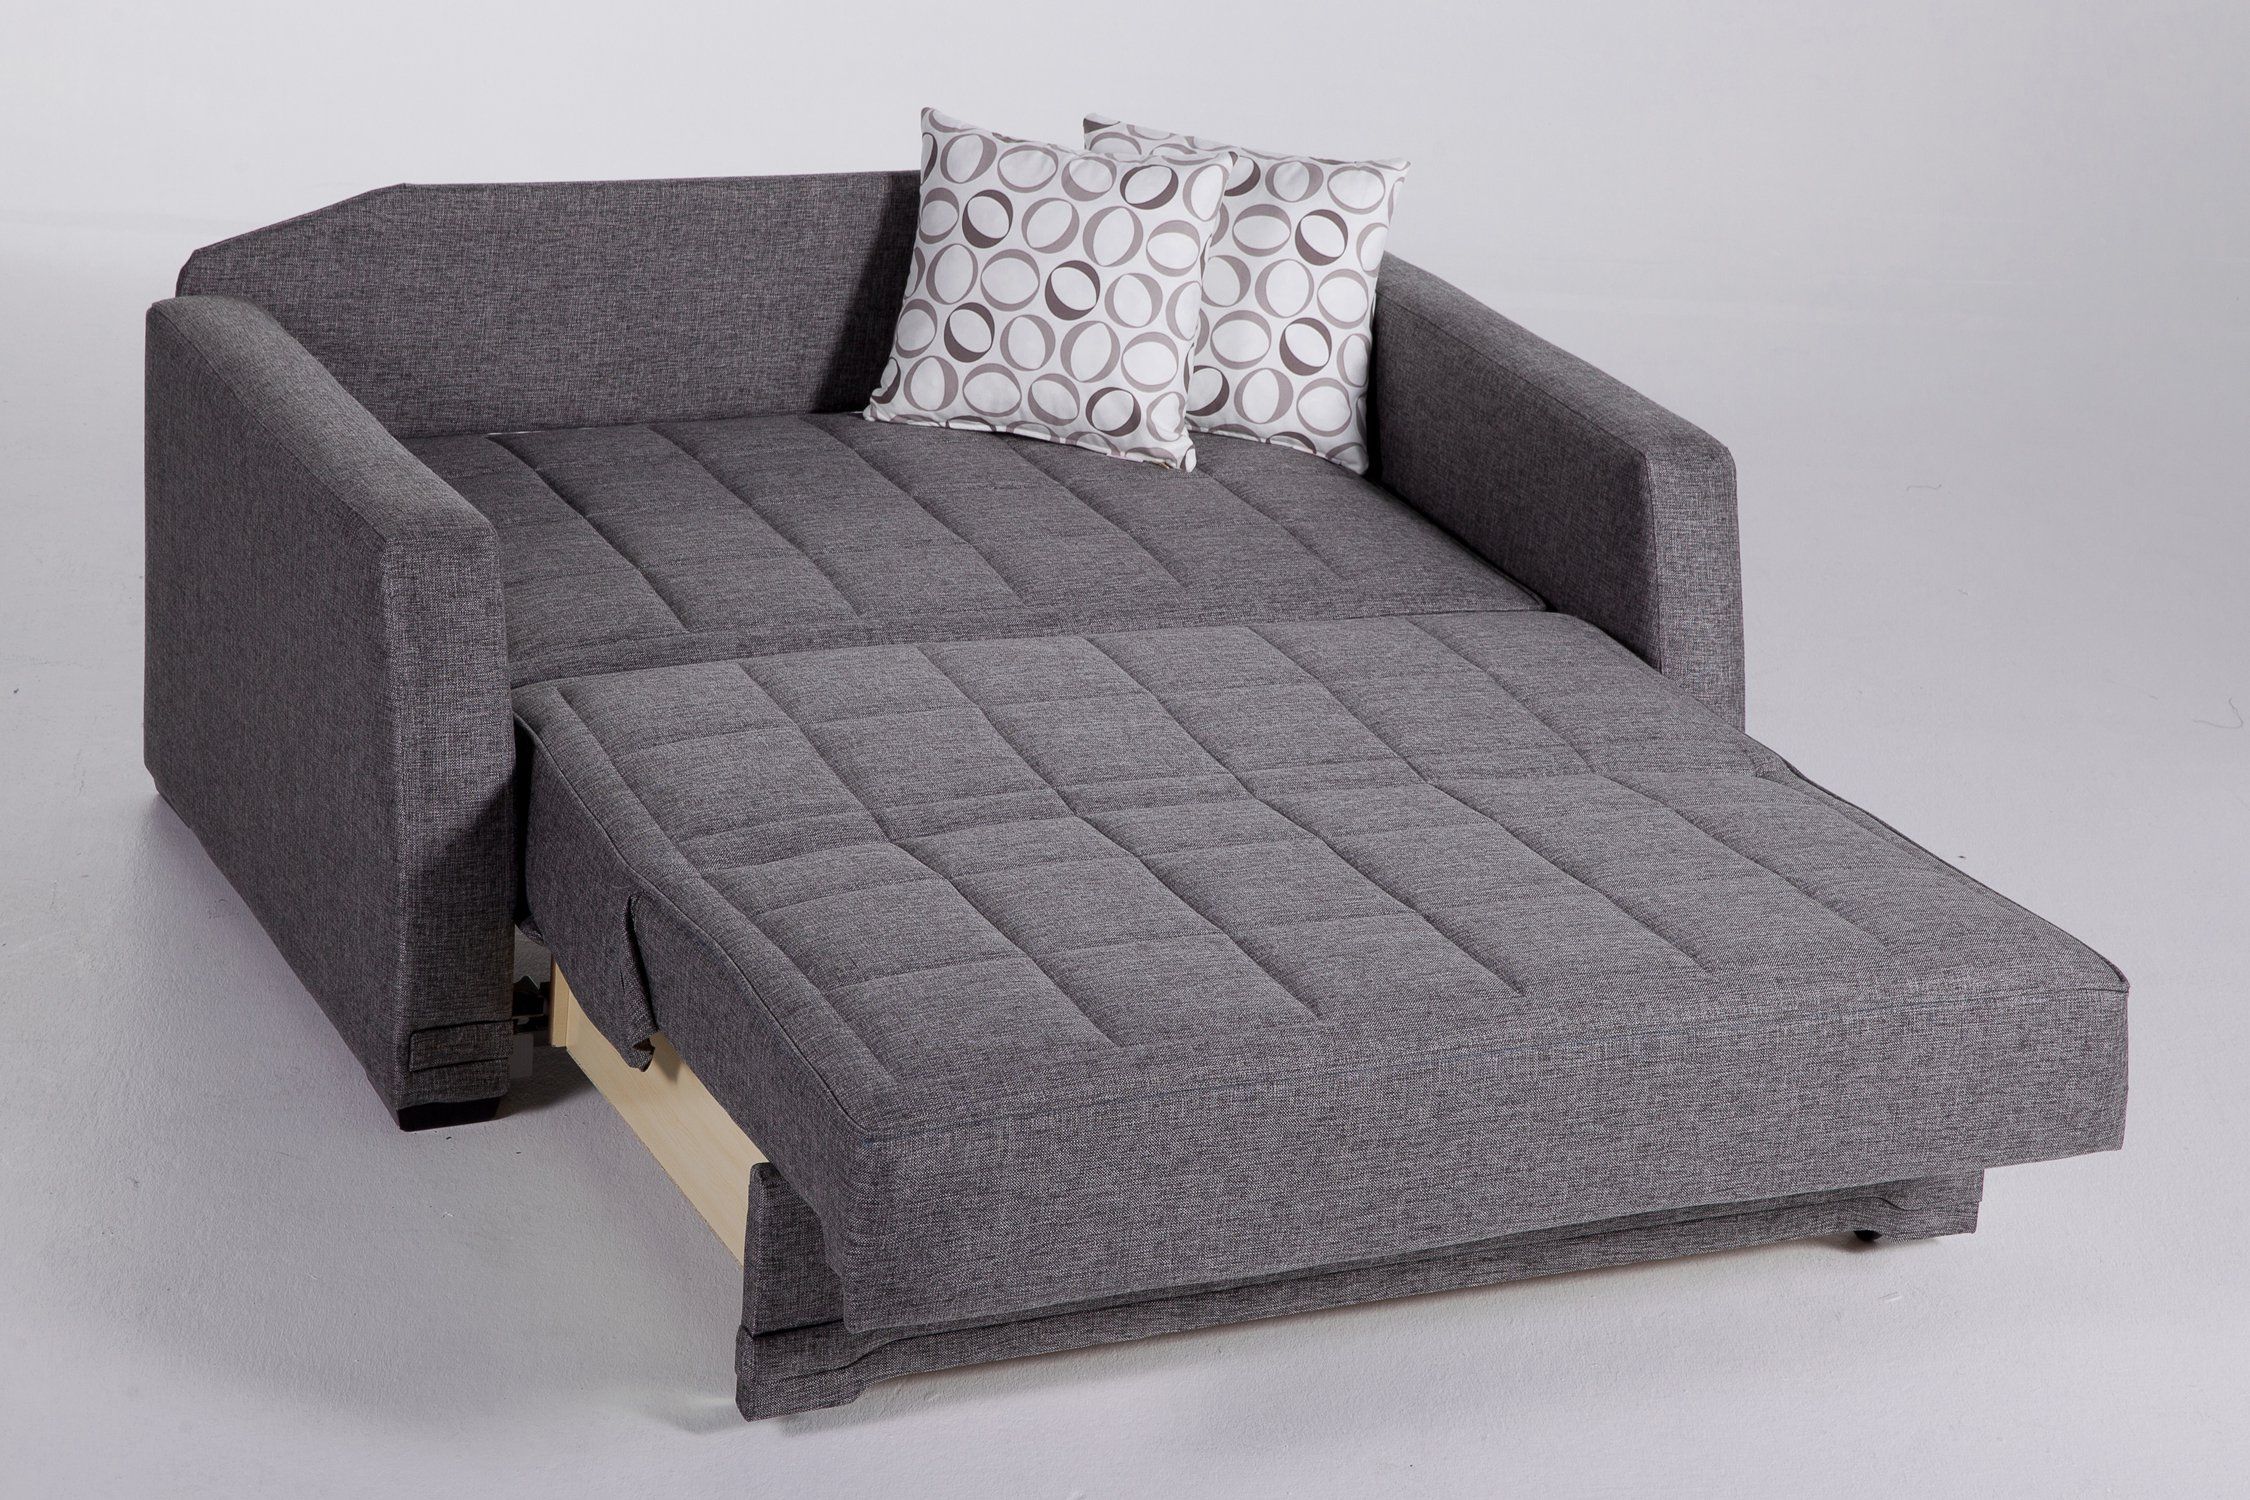 Valerie Diego Gray Loveseat Sleeperistikbal Furniture Pertaining To Twin Nancy Sectional Sofa Beds With Storage (View 9 of 15)